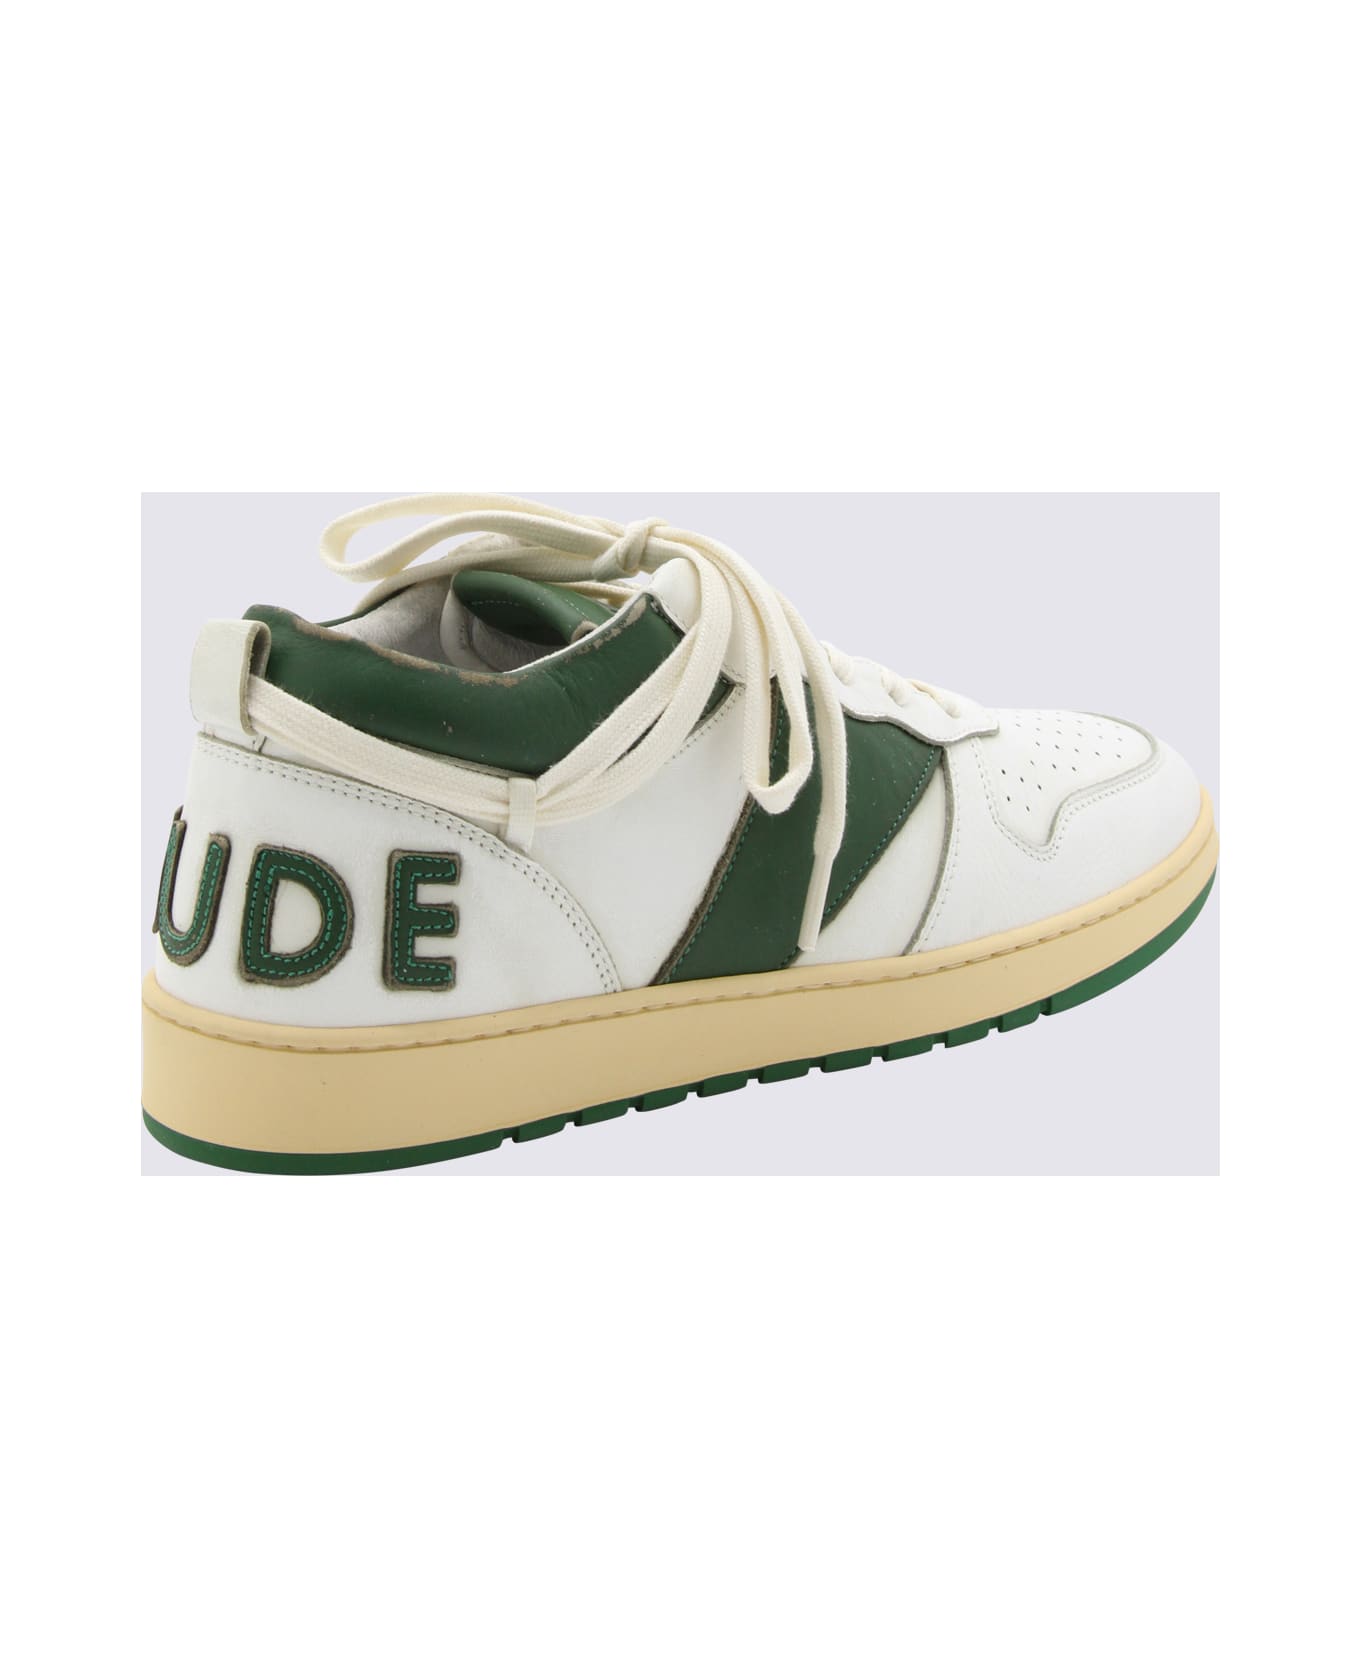 Rhude White And Hunter Green Leather Sneakers - WHITE/HUNTER GREEN